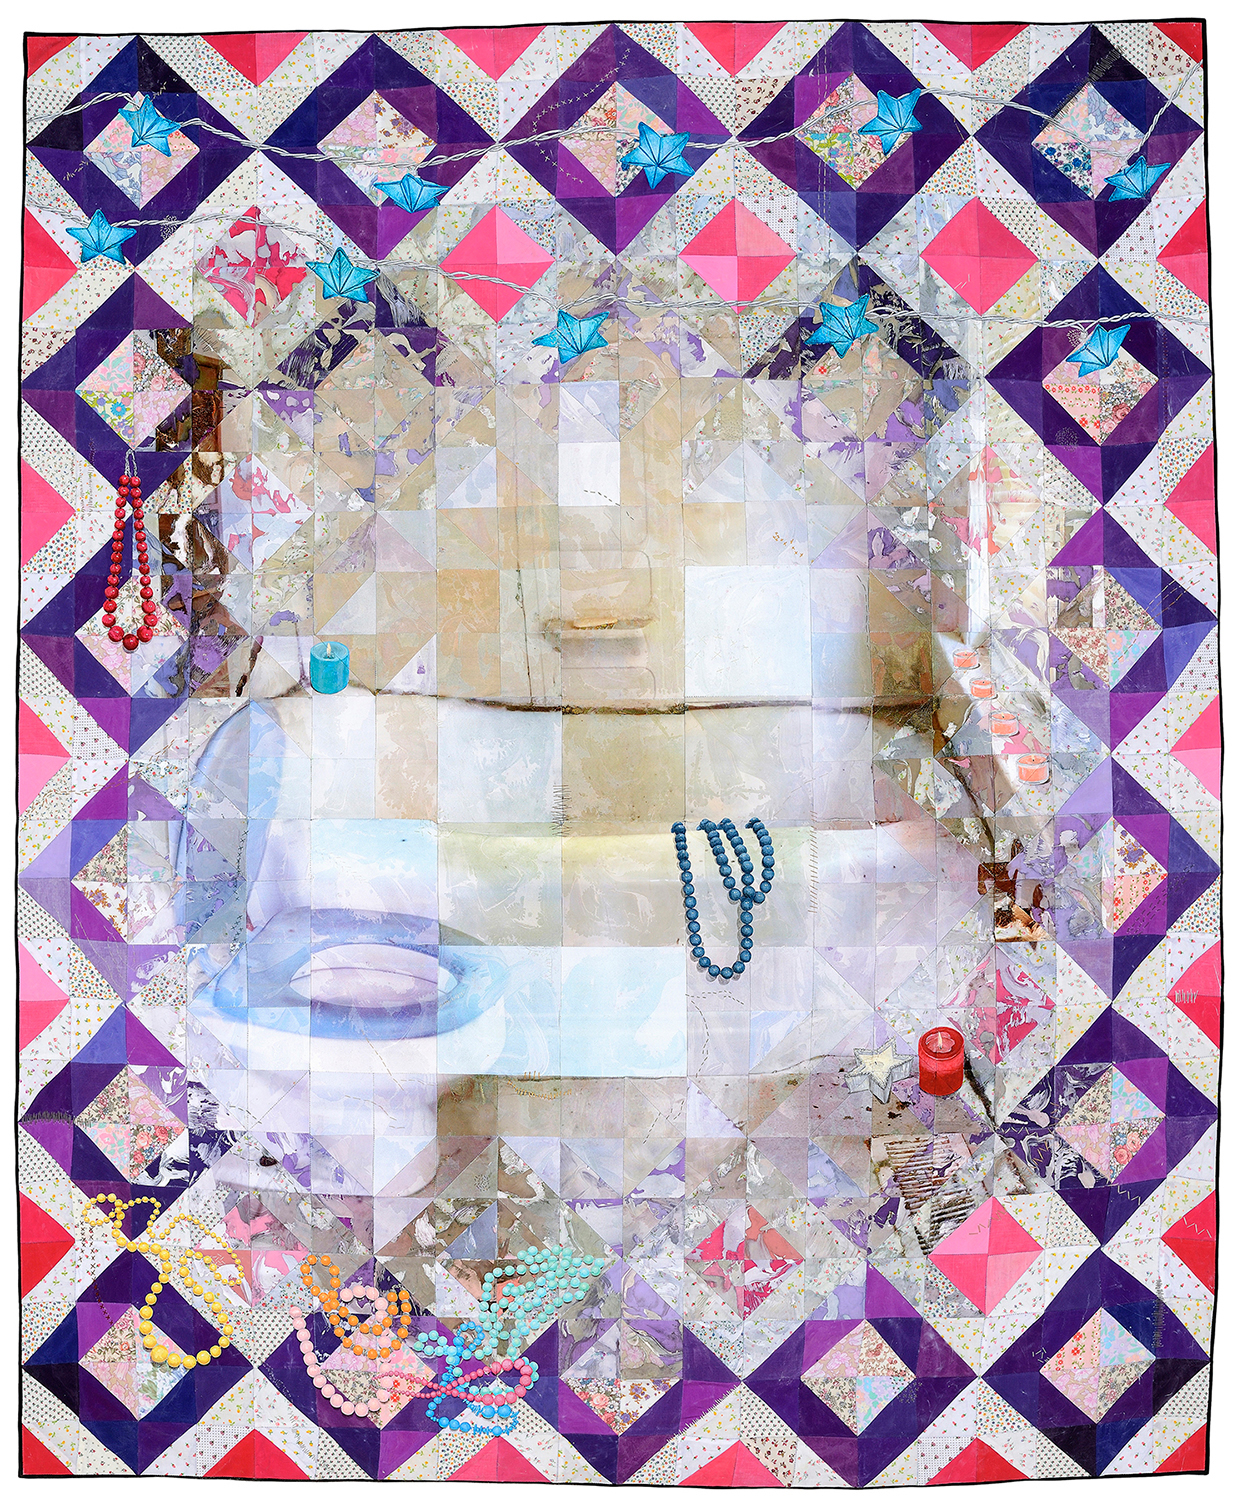 Jeana Eve Klein, The End of Romance, 2014. Mixed media quilt (Digital printing, acrylic paint and dye on recycled fabric; machine-pieced and hand-quilted), 64 x 52 in.